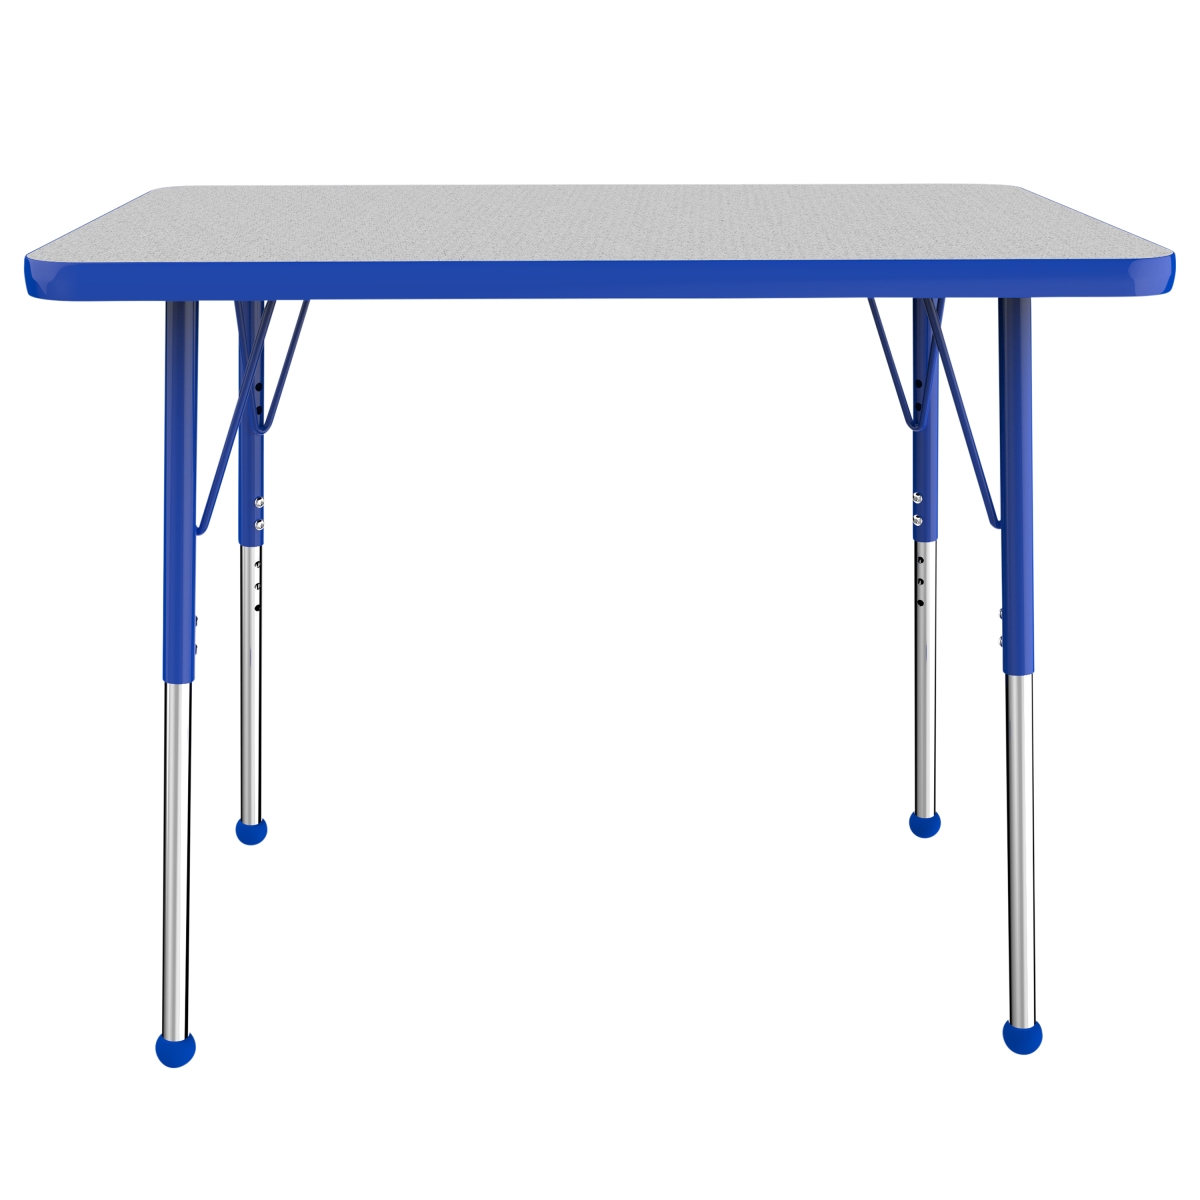 10004-gybl 24 X 36 In. Rectangle T-mold Adjustable Activity Table With Standard Ball - Grey & Blue